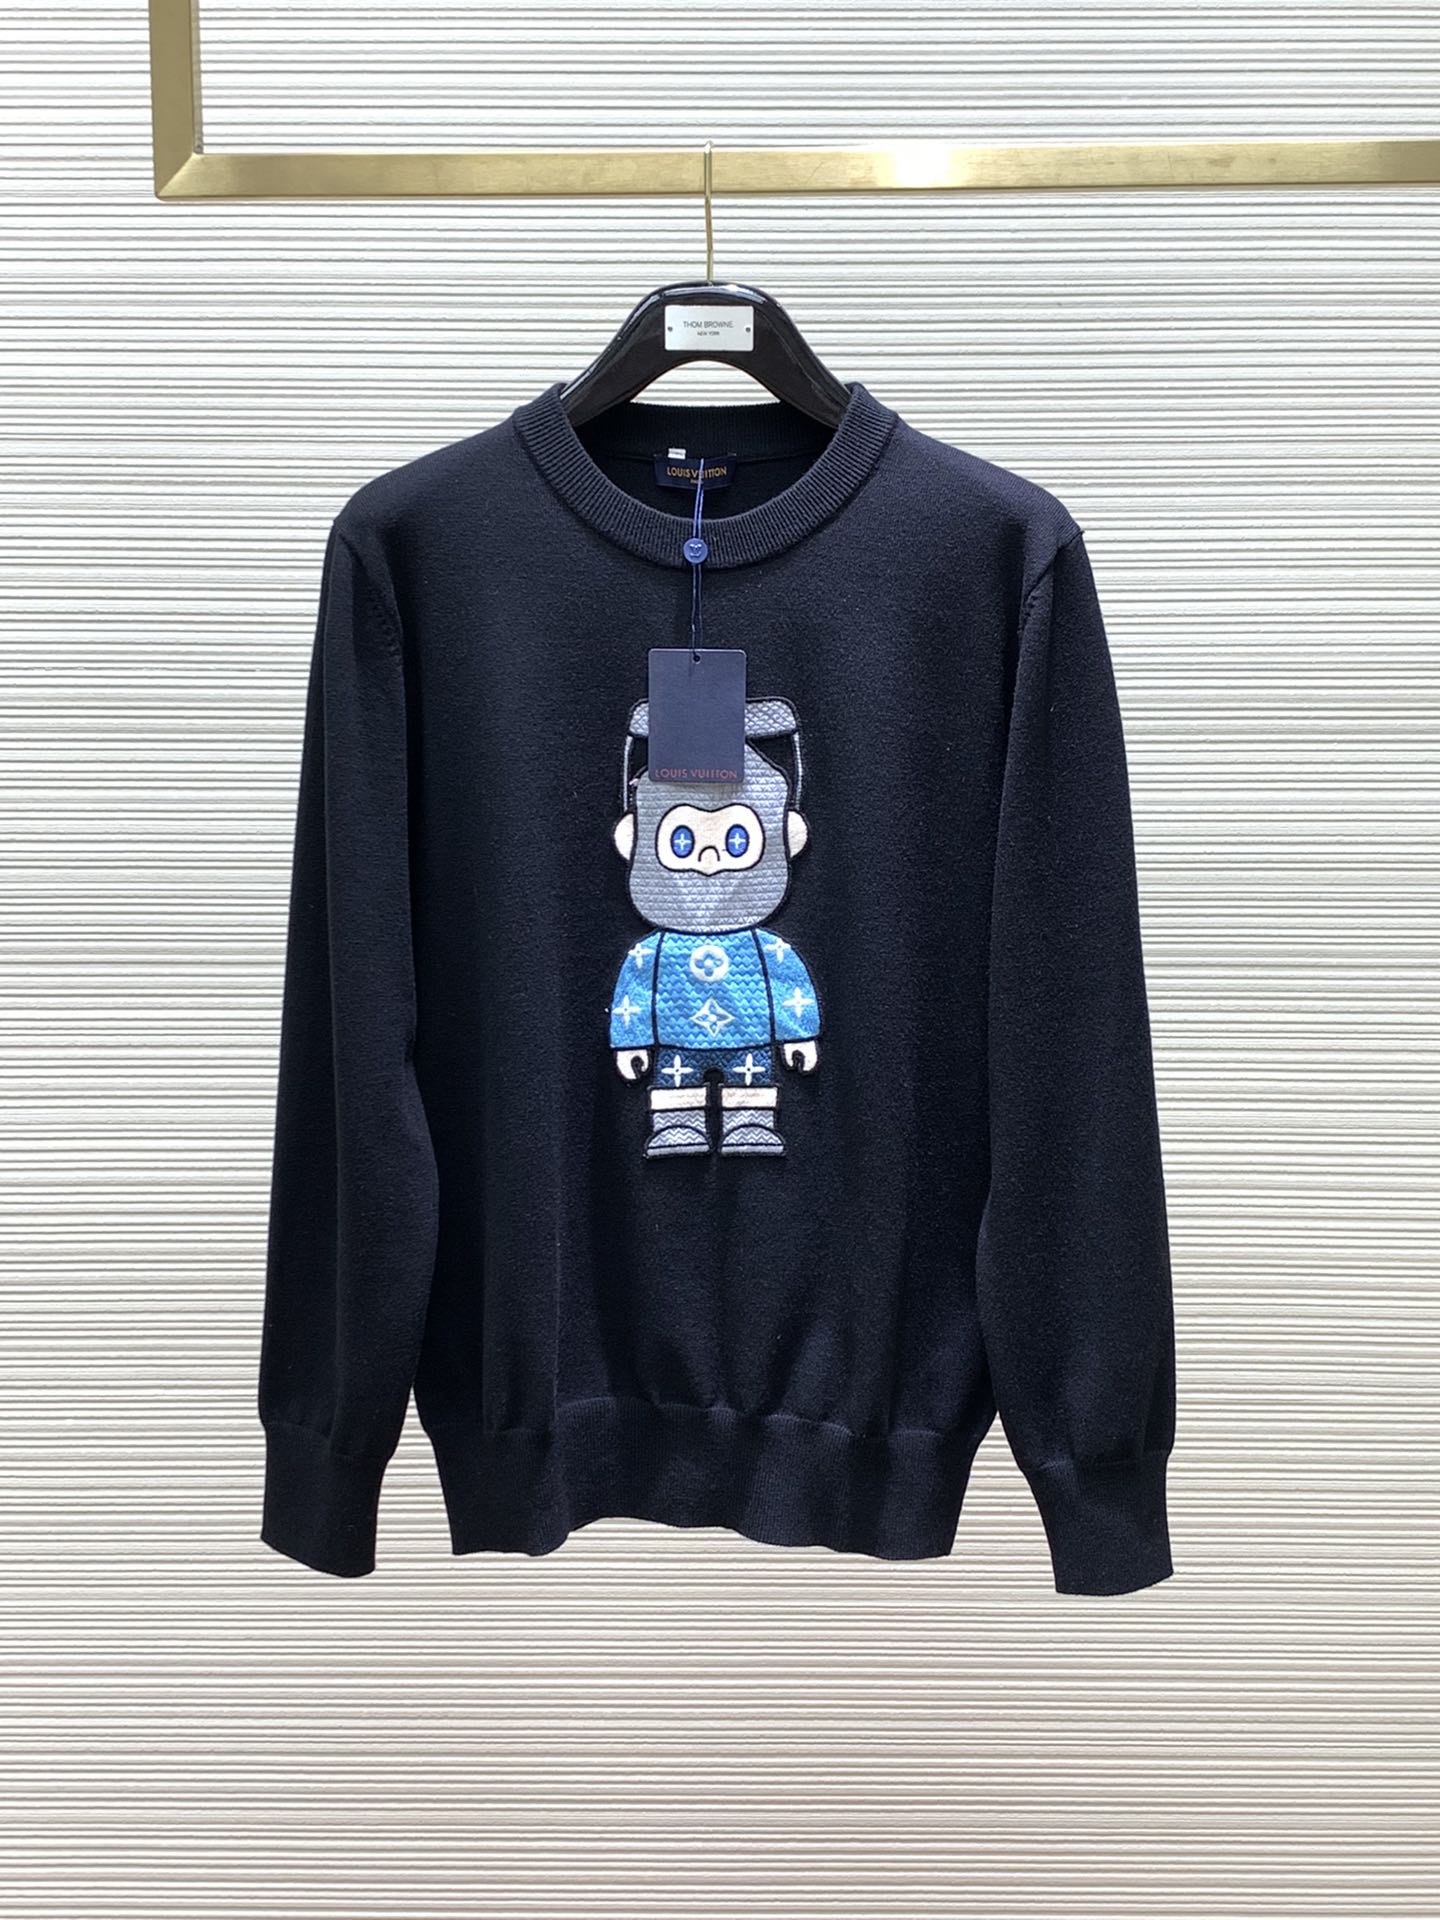 Louis Vuitton Clothing Knit Sweater Sweatshirts Embroidery Knitting Fall/Winter Collection Fashion Long Sleeve